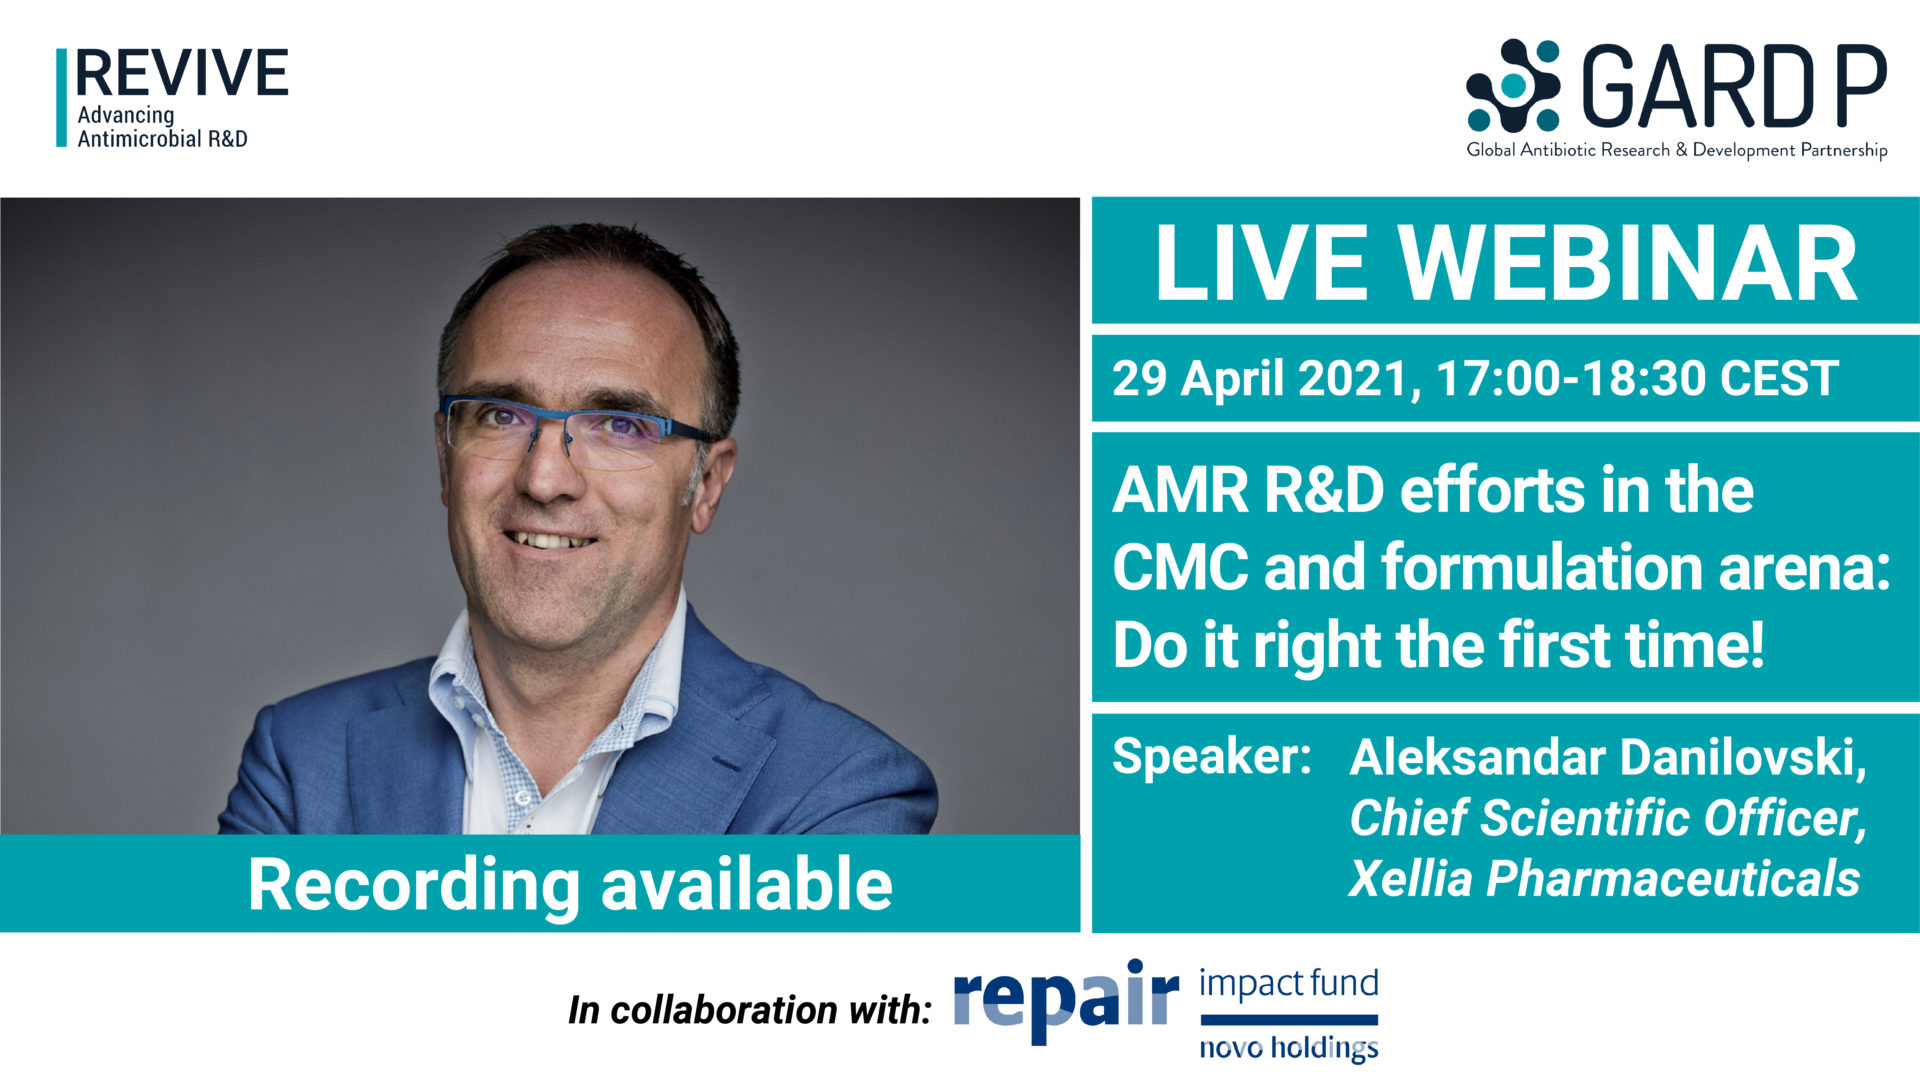 AMR R&D efforts in the CMC and formulation arena: Do it right the first time!